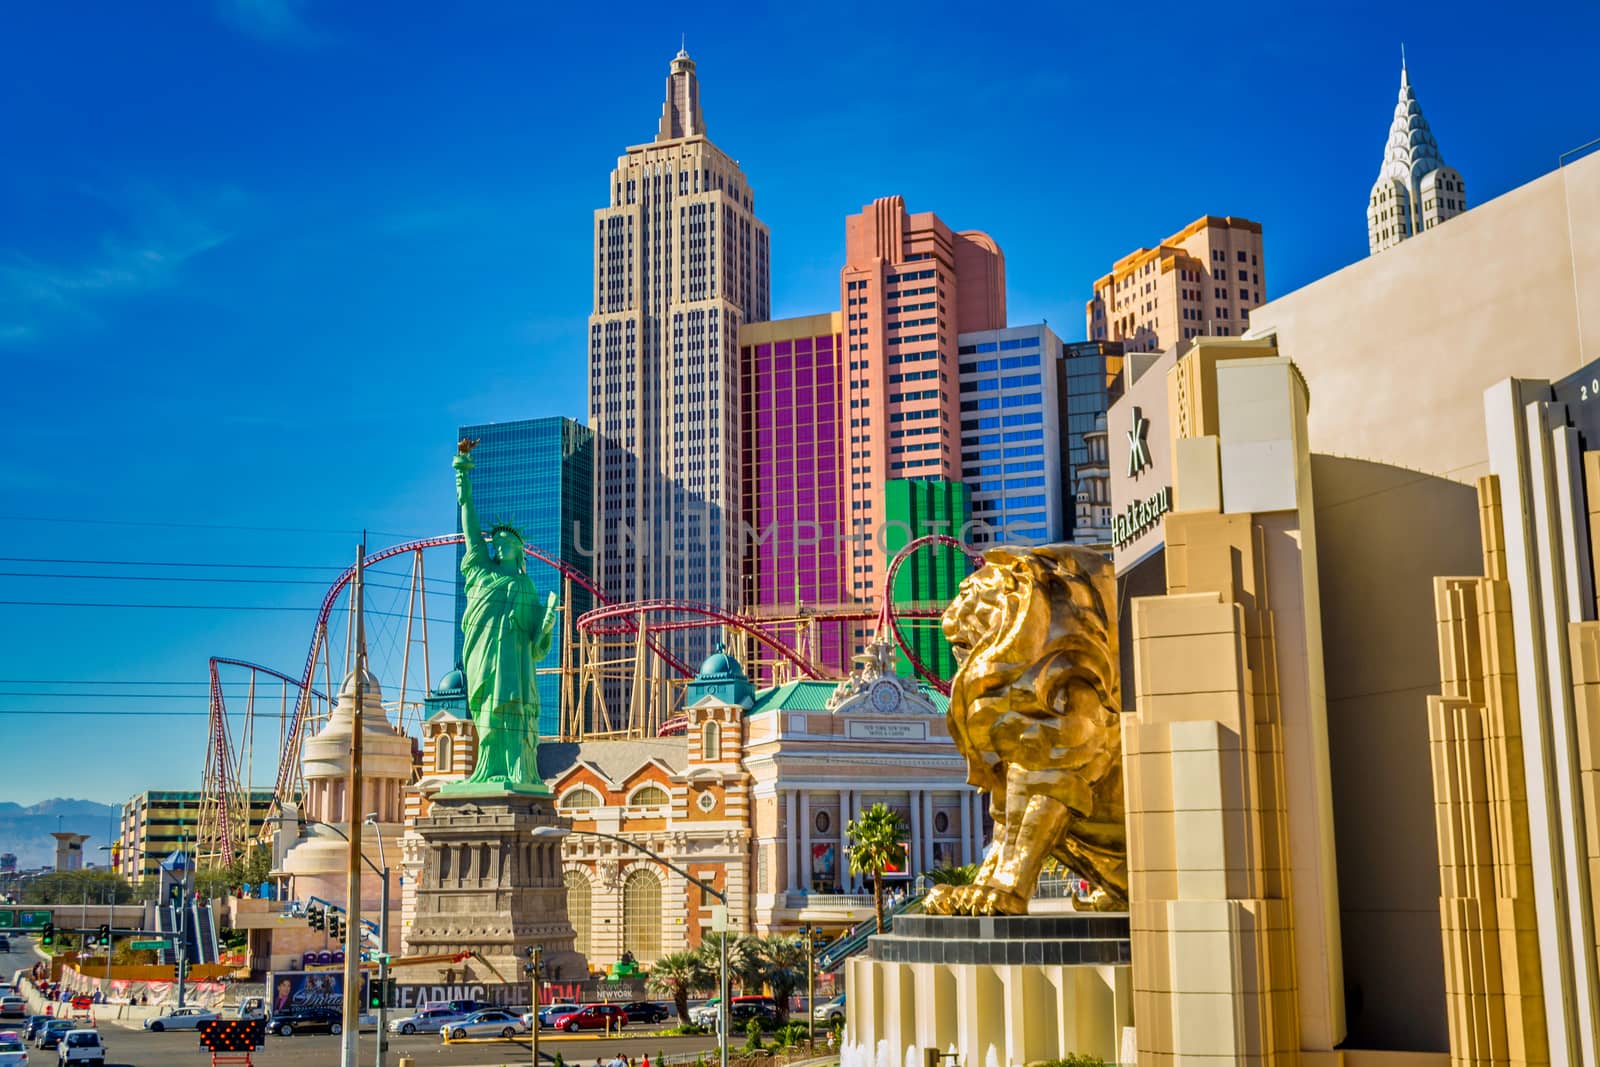 View on hotel and casino resort New York and hakkasan on the strip in Las Vegas, Nevada by kb79